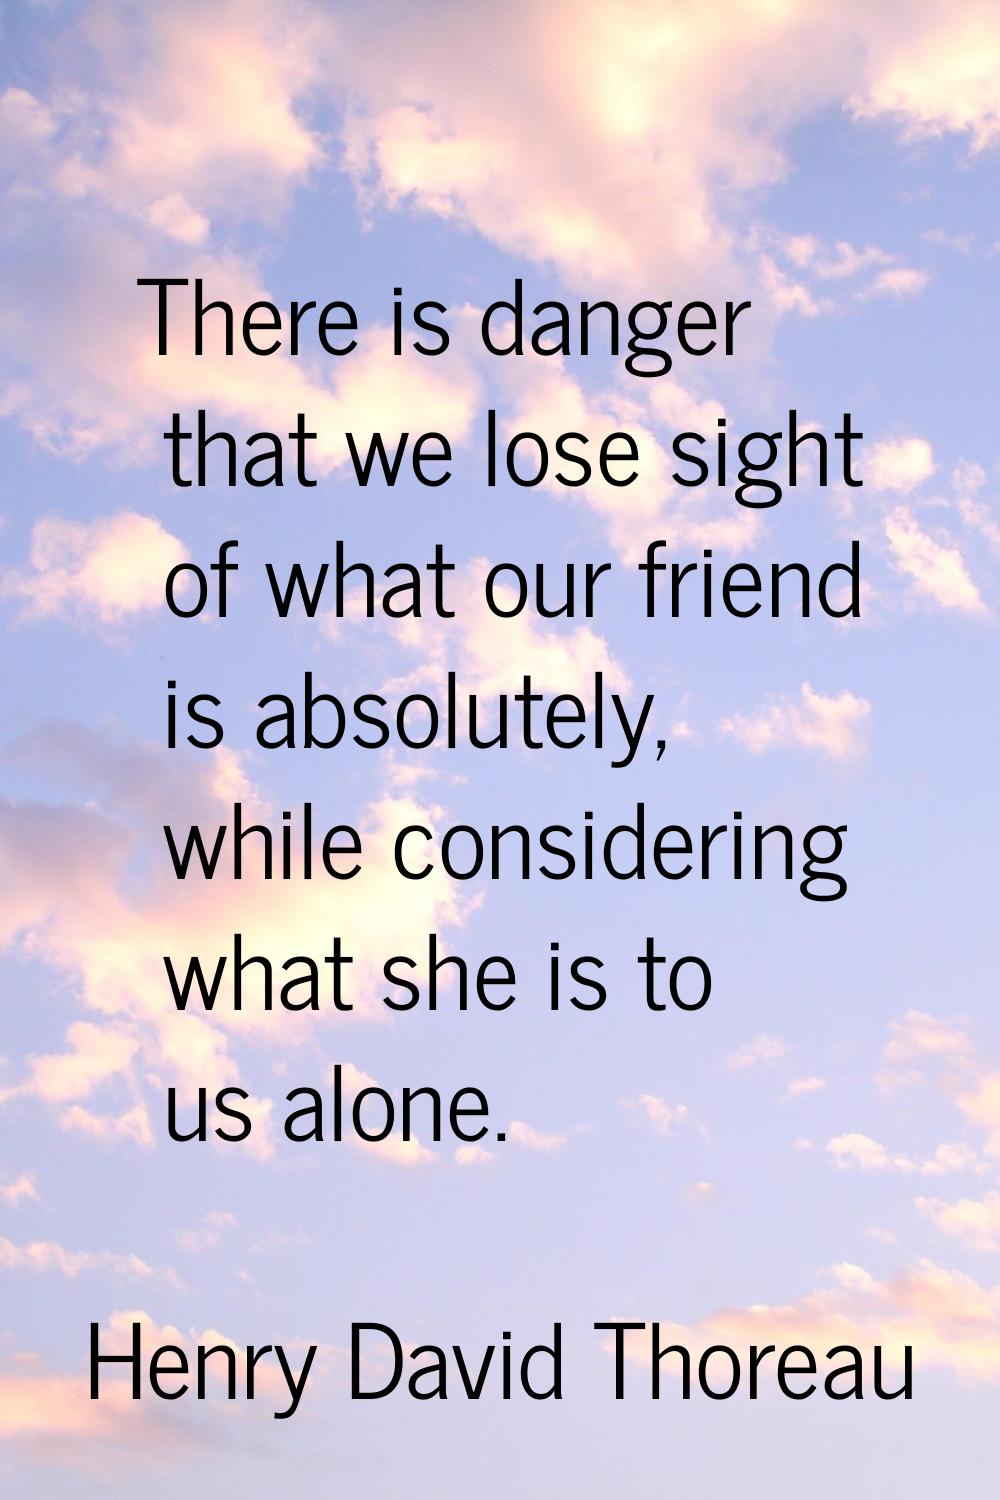 There is danger that we lose sight of what our friend is absolutely, while considering what she is 